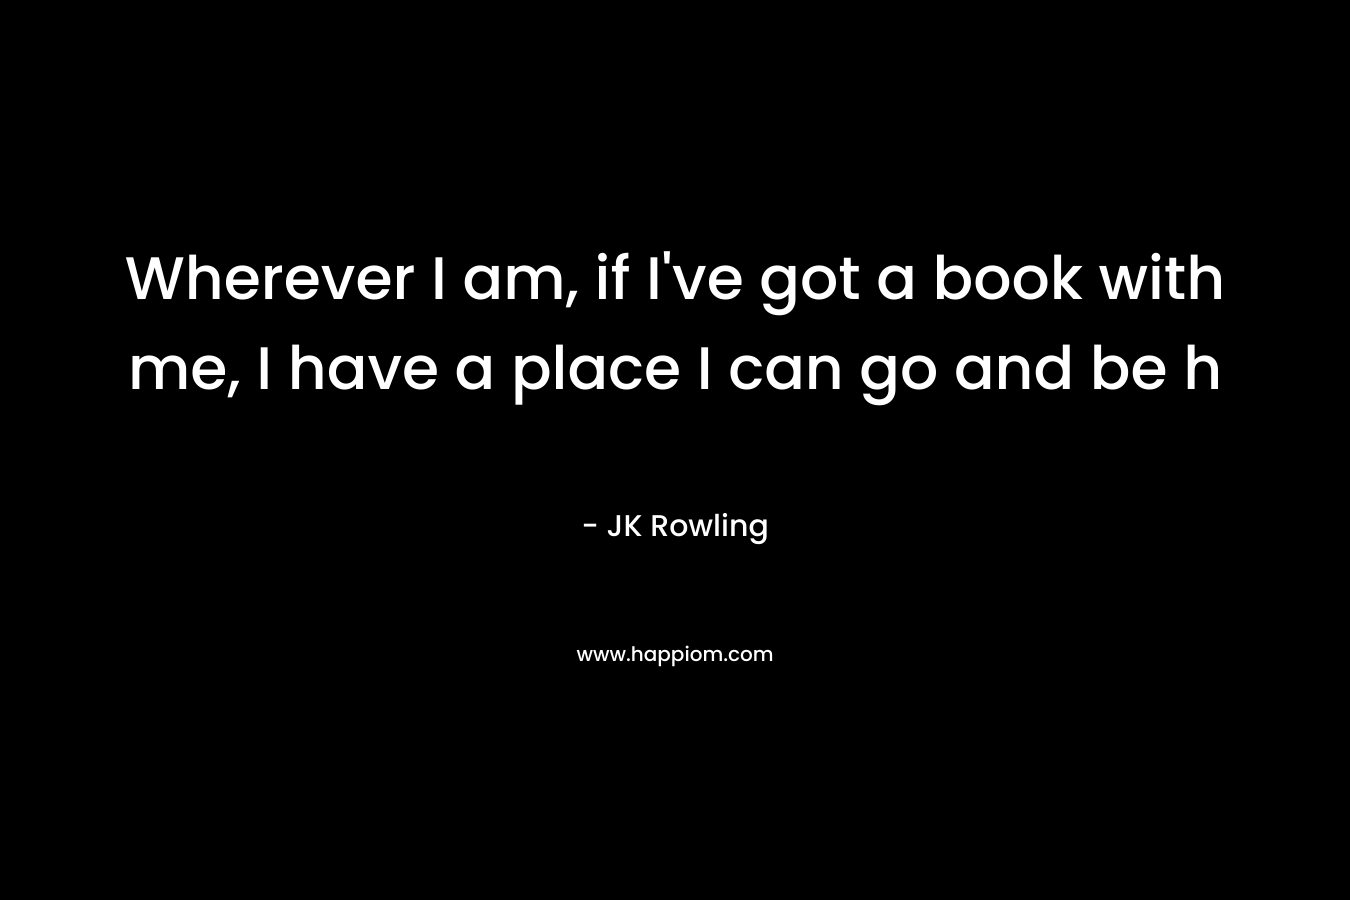 Wherever I am, if I’ve got a book with me, I have a place I can go and be h – JK Rowling